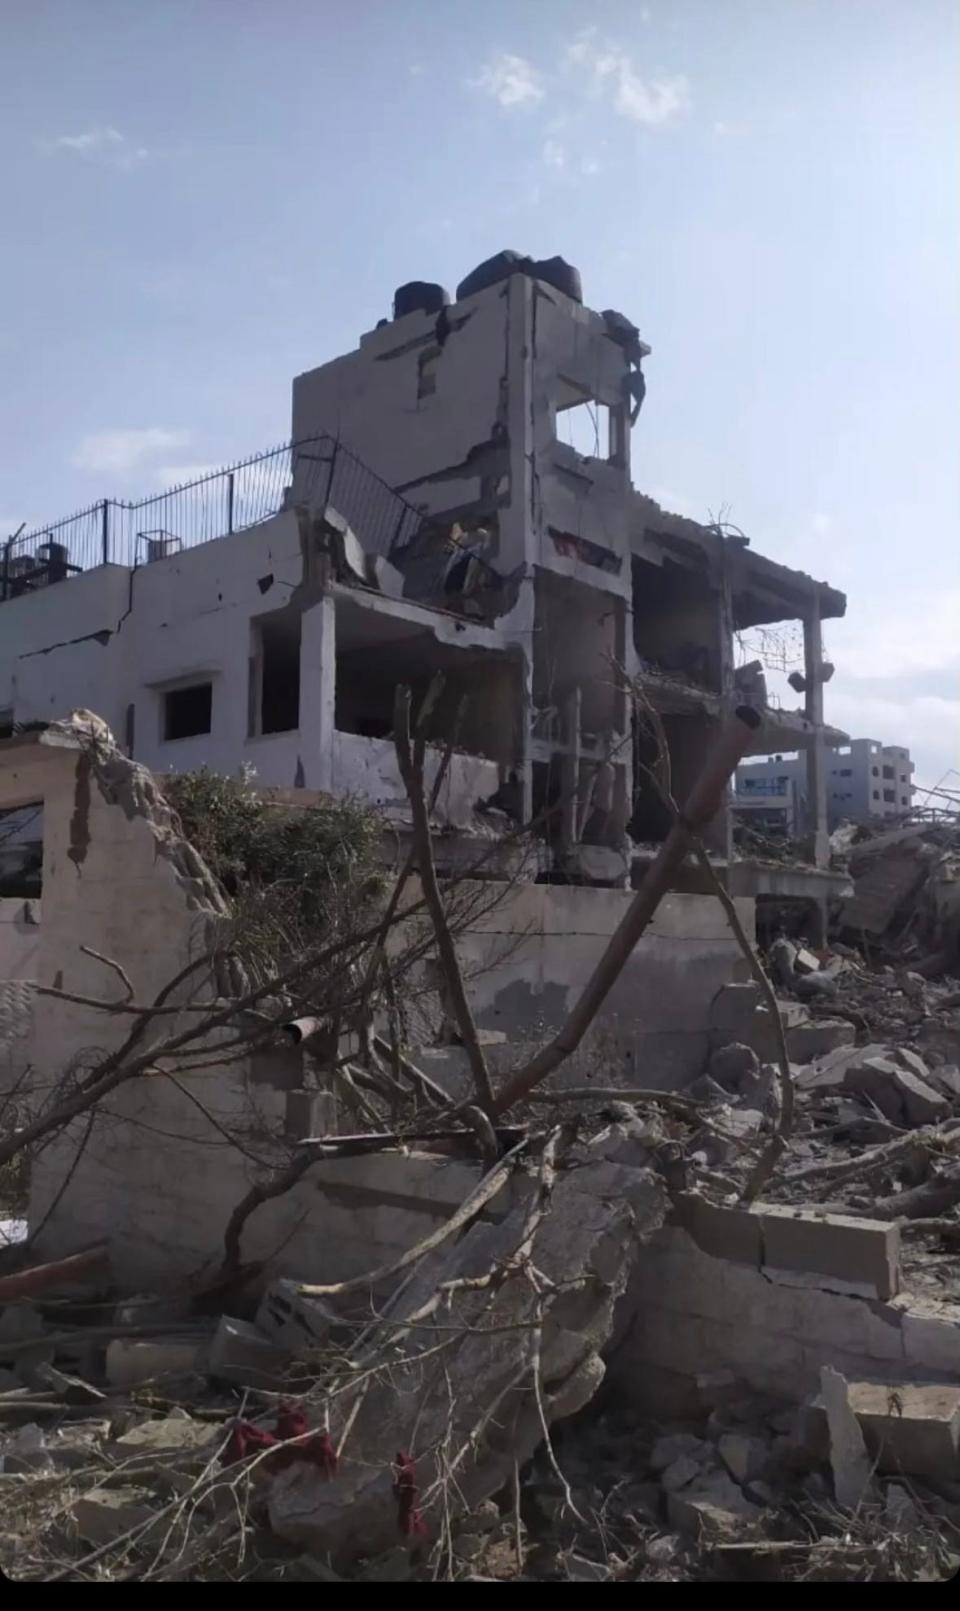 Nadia Sakalla's home in the Rimal neighborhood of Gaza City was destroyed in an airstrike. The home was in the family for generations, said Esam Sakalla of Franklin.